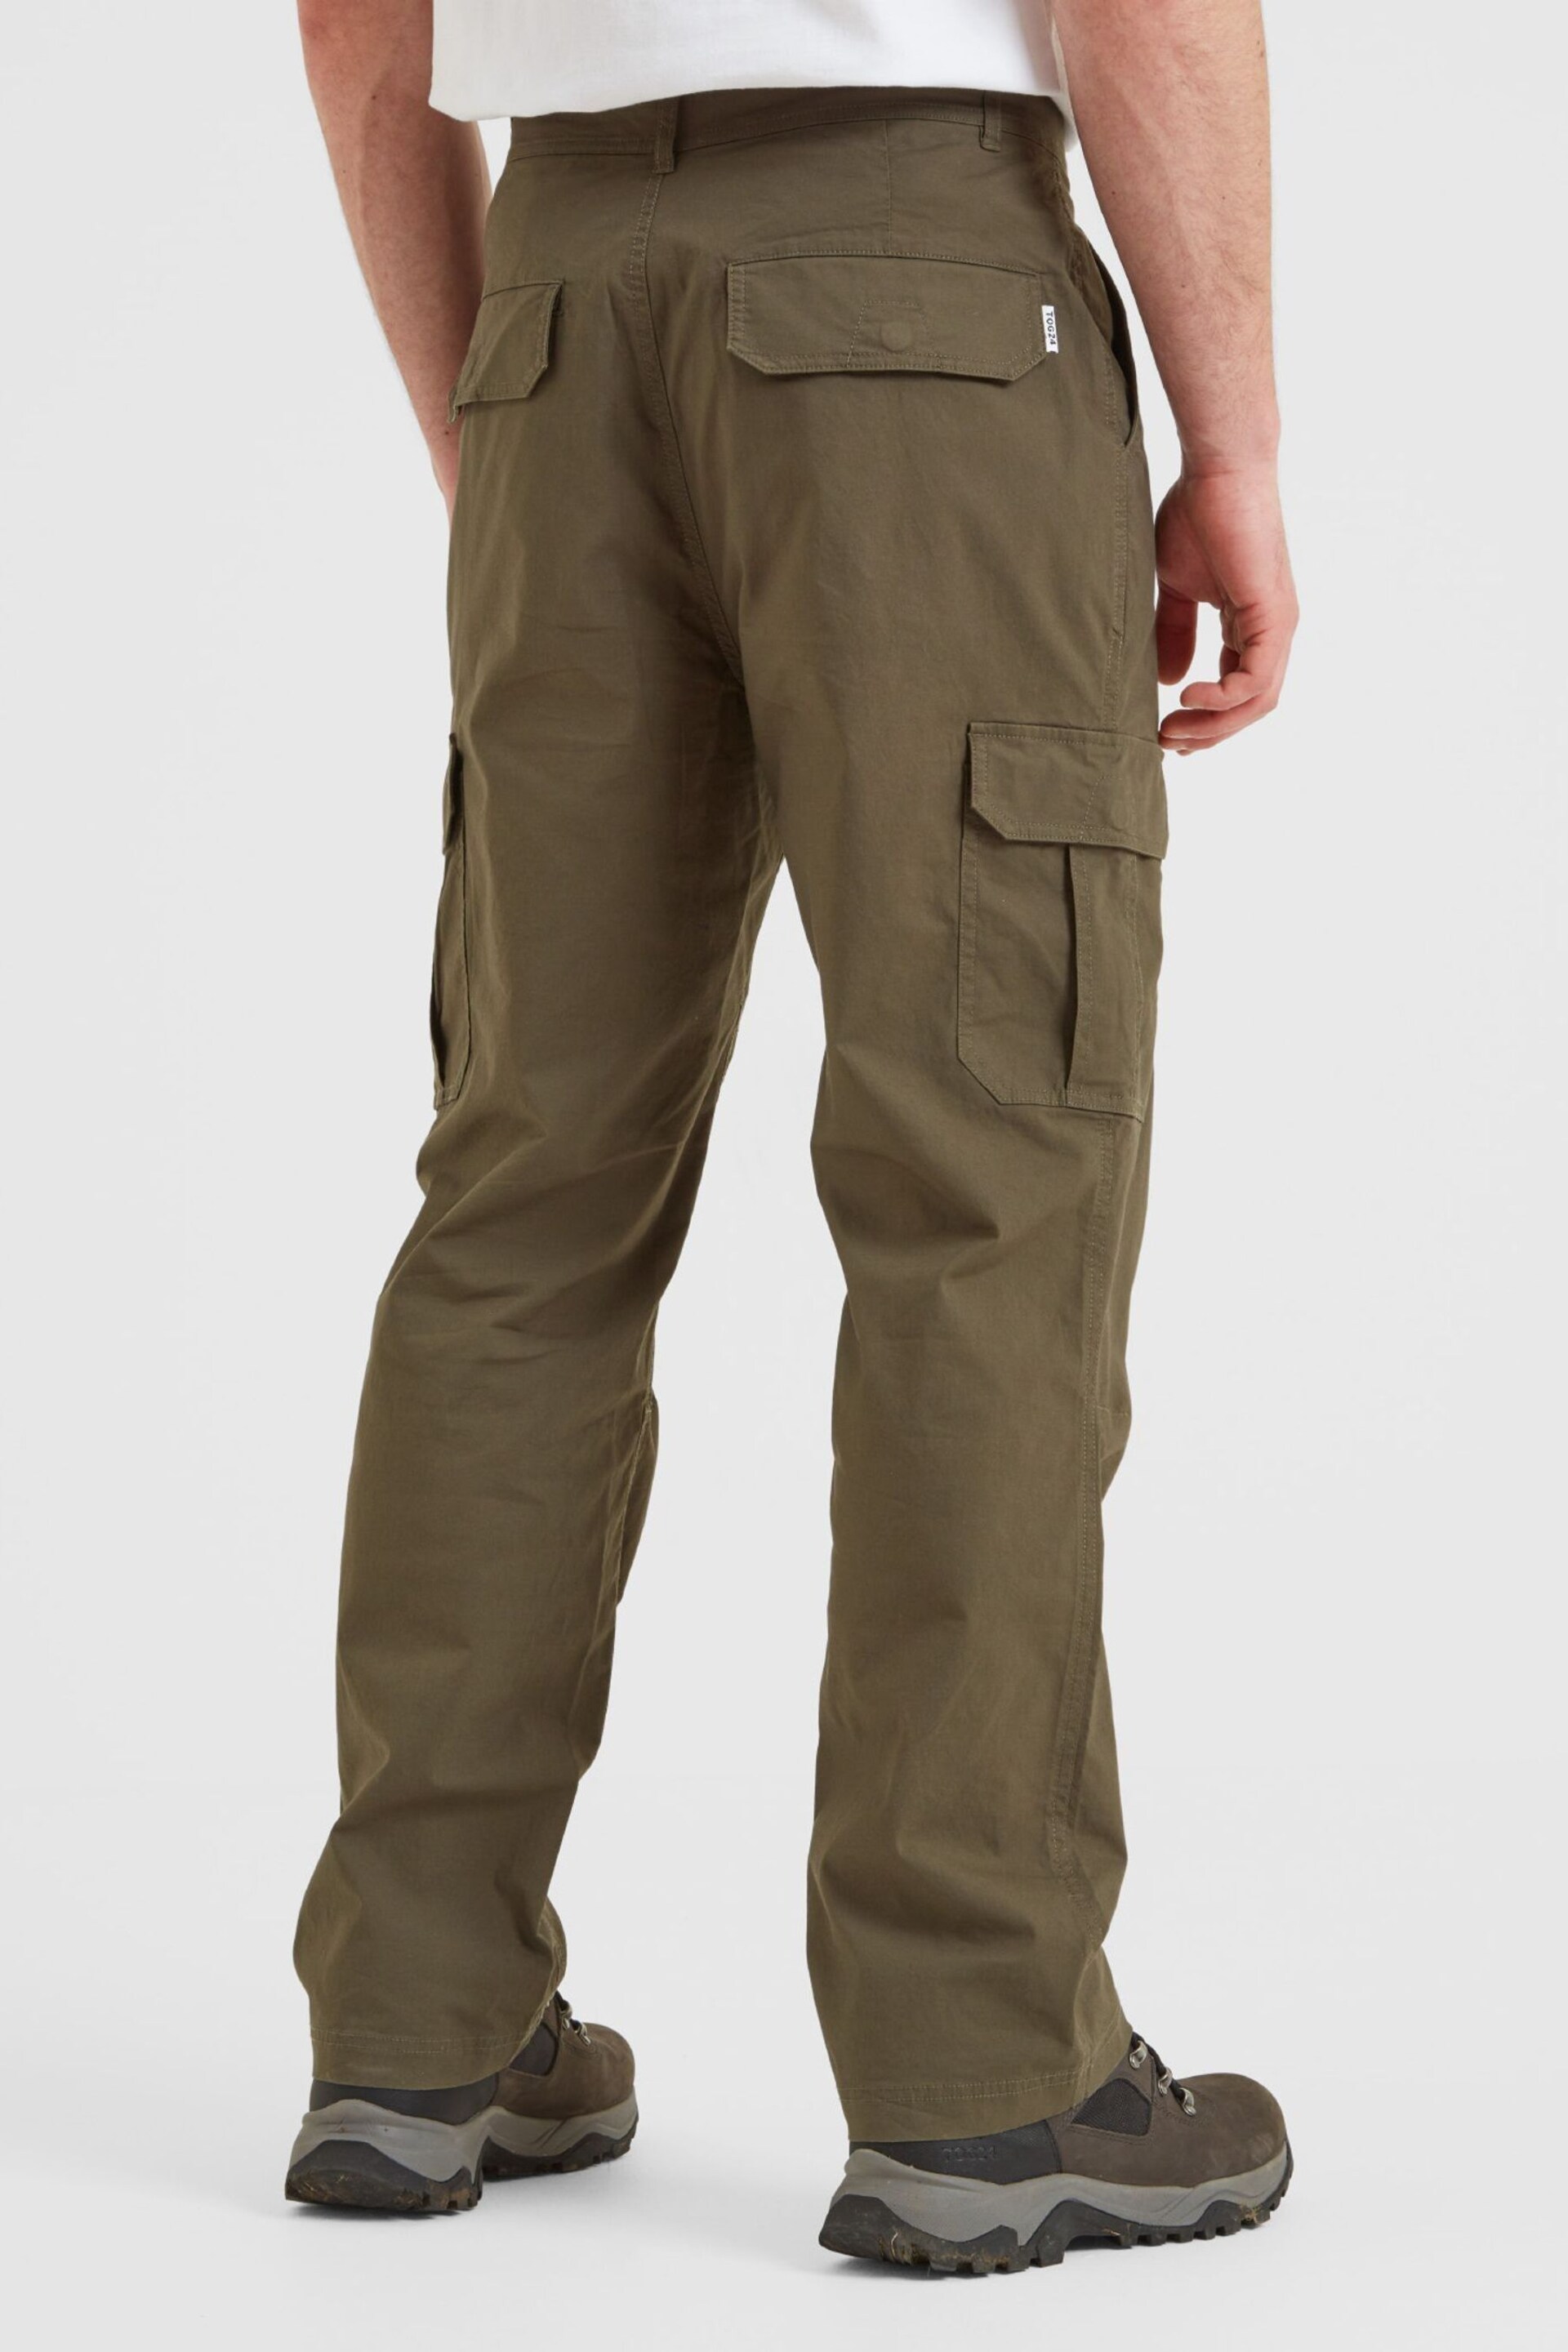 Tog 24 Green Dibden Cargo Trousers - Image 2 of 8